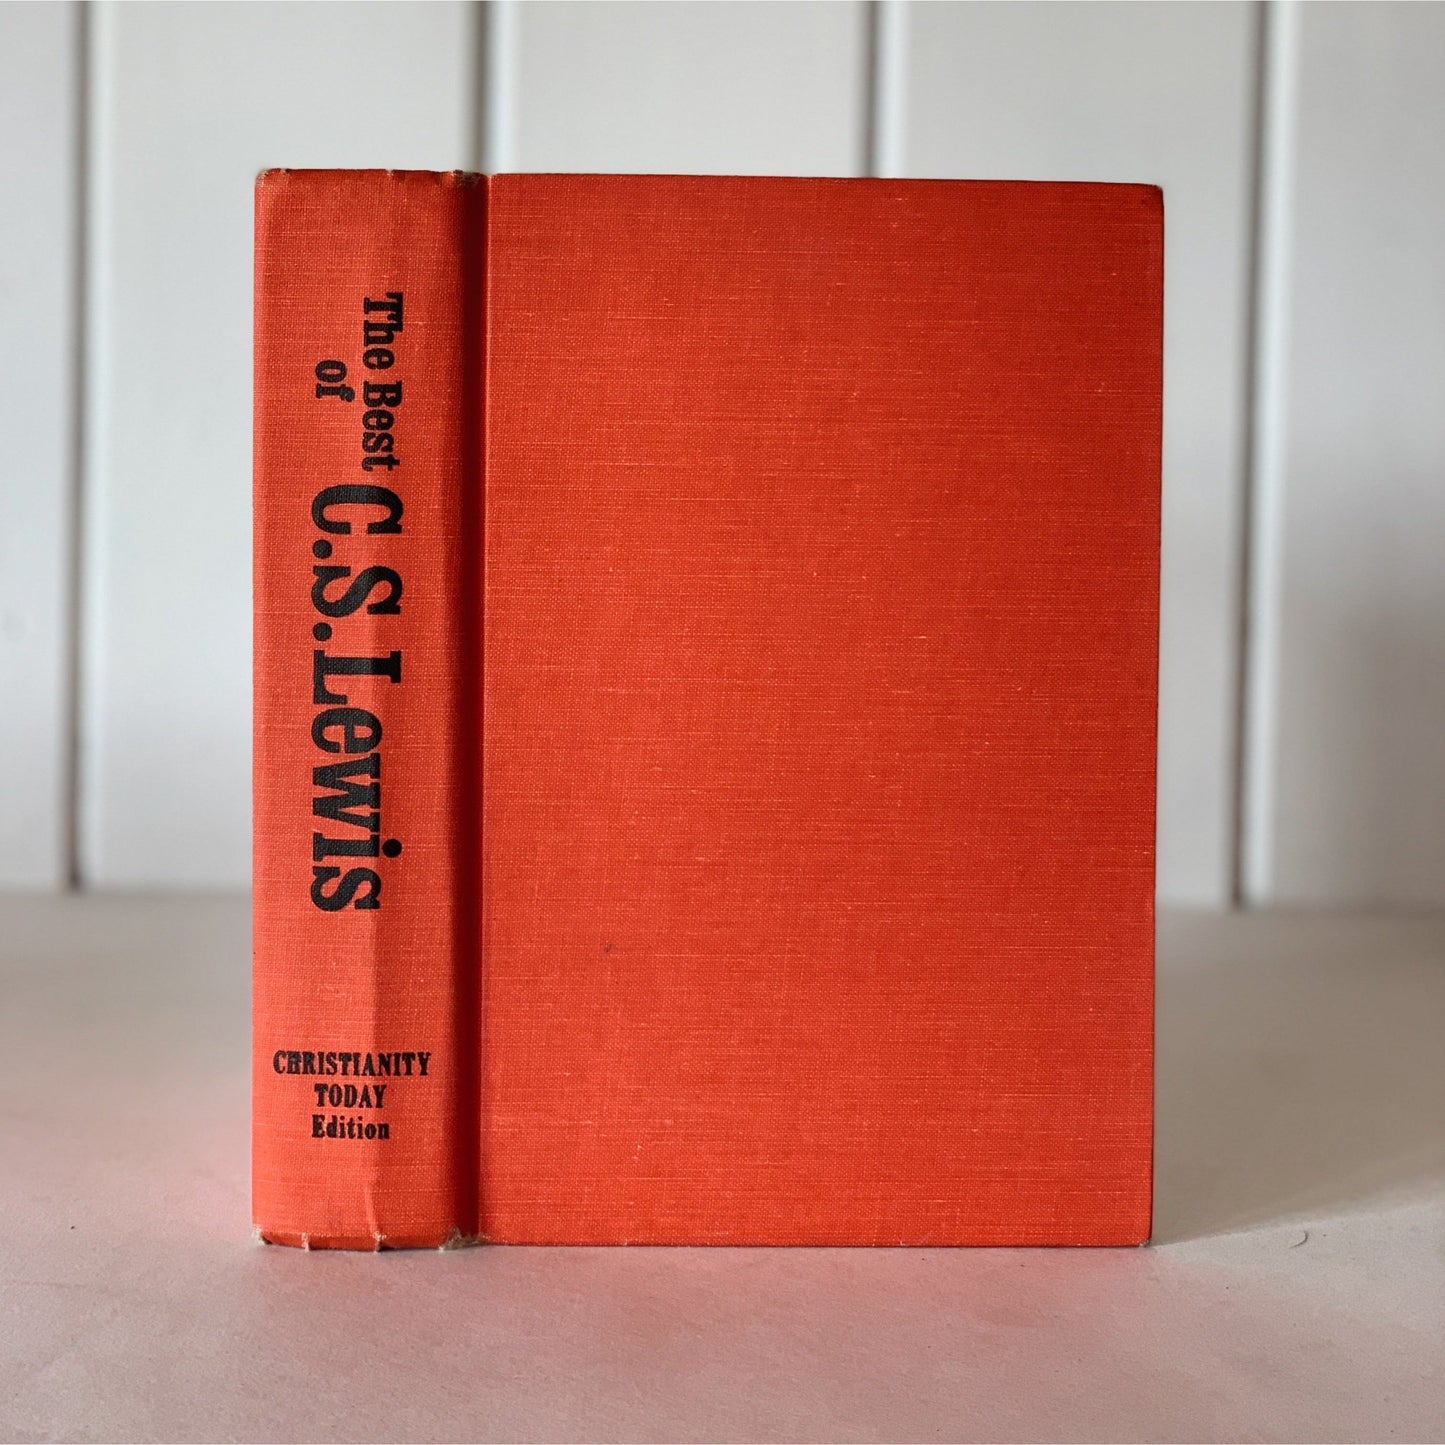 The Best of C.S. Lewis, Five Books in One Volume, 1969